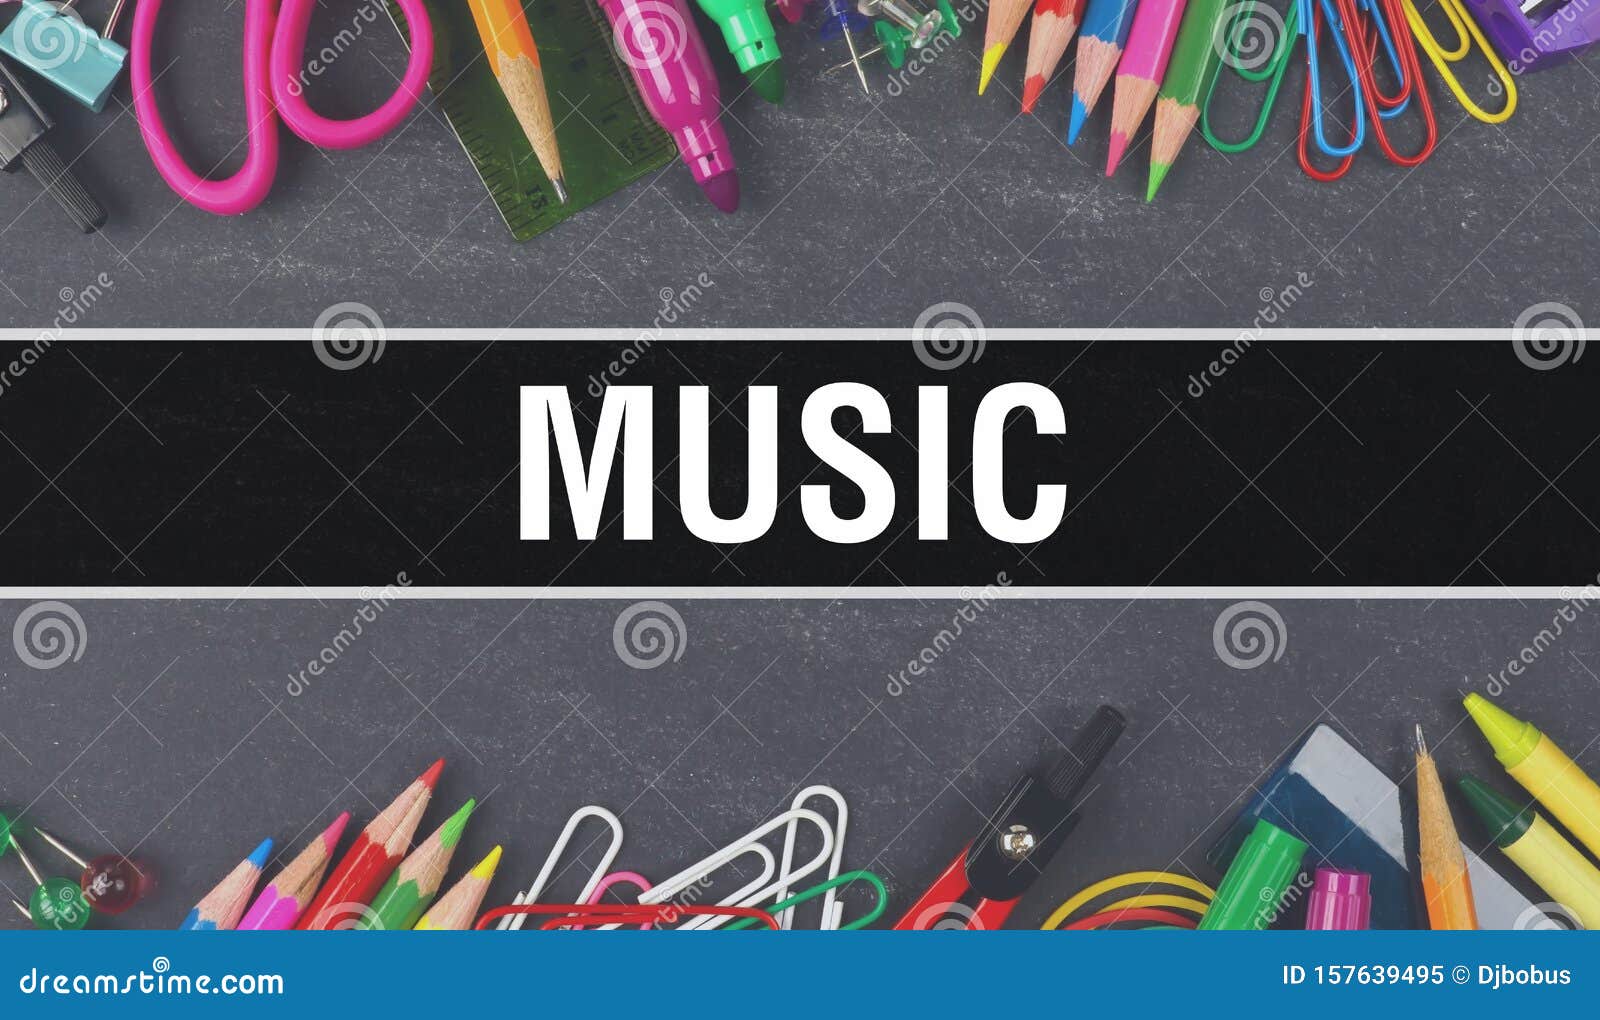 Music Text Written on Education Background of Back To School Concept. Music  Concept Banner on Education Sketch with School Stock Image - Image of  concept, blackboard: 157639495